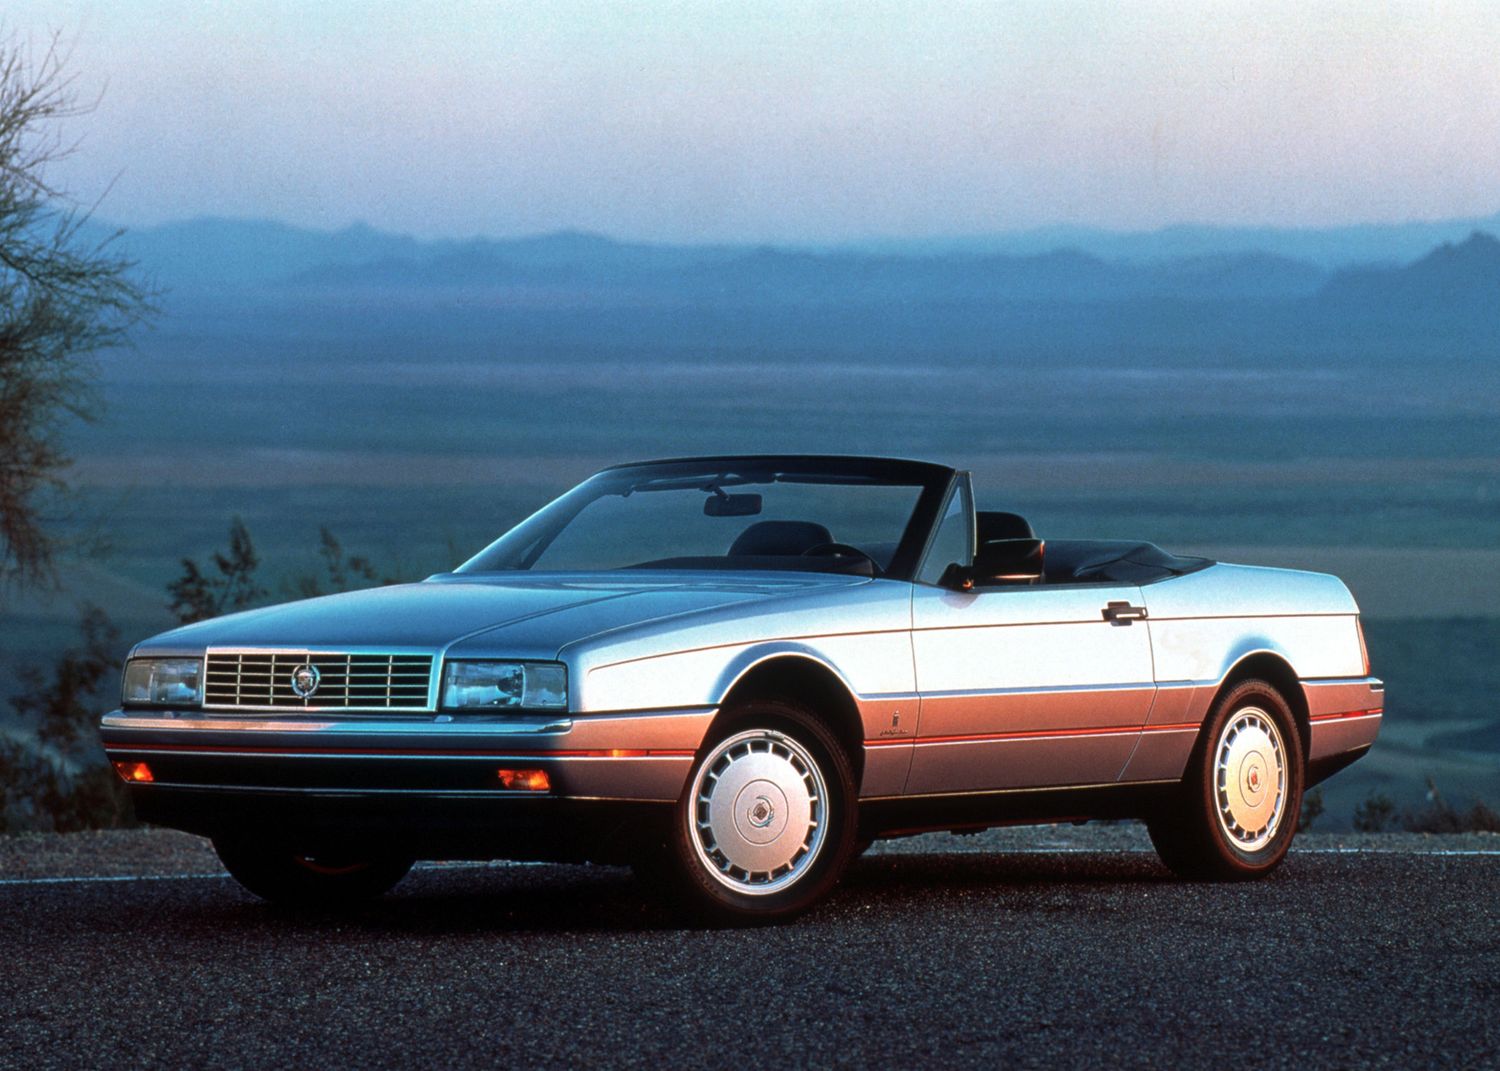 The Cadillac Allante: There Was Many A Slip Twixt The Cup And The Lip On The Way To An All-Italian Design For GM….